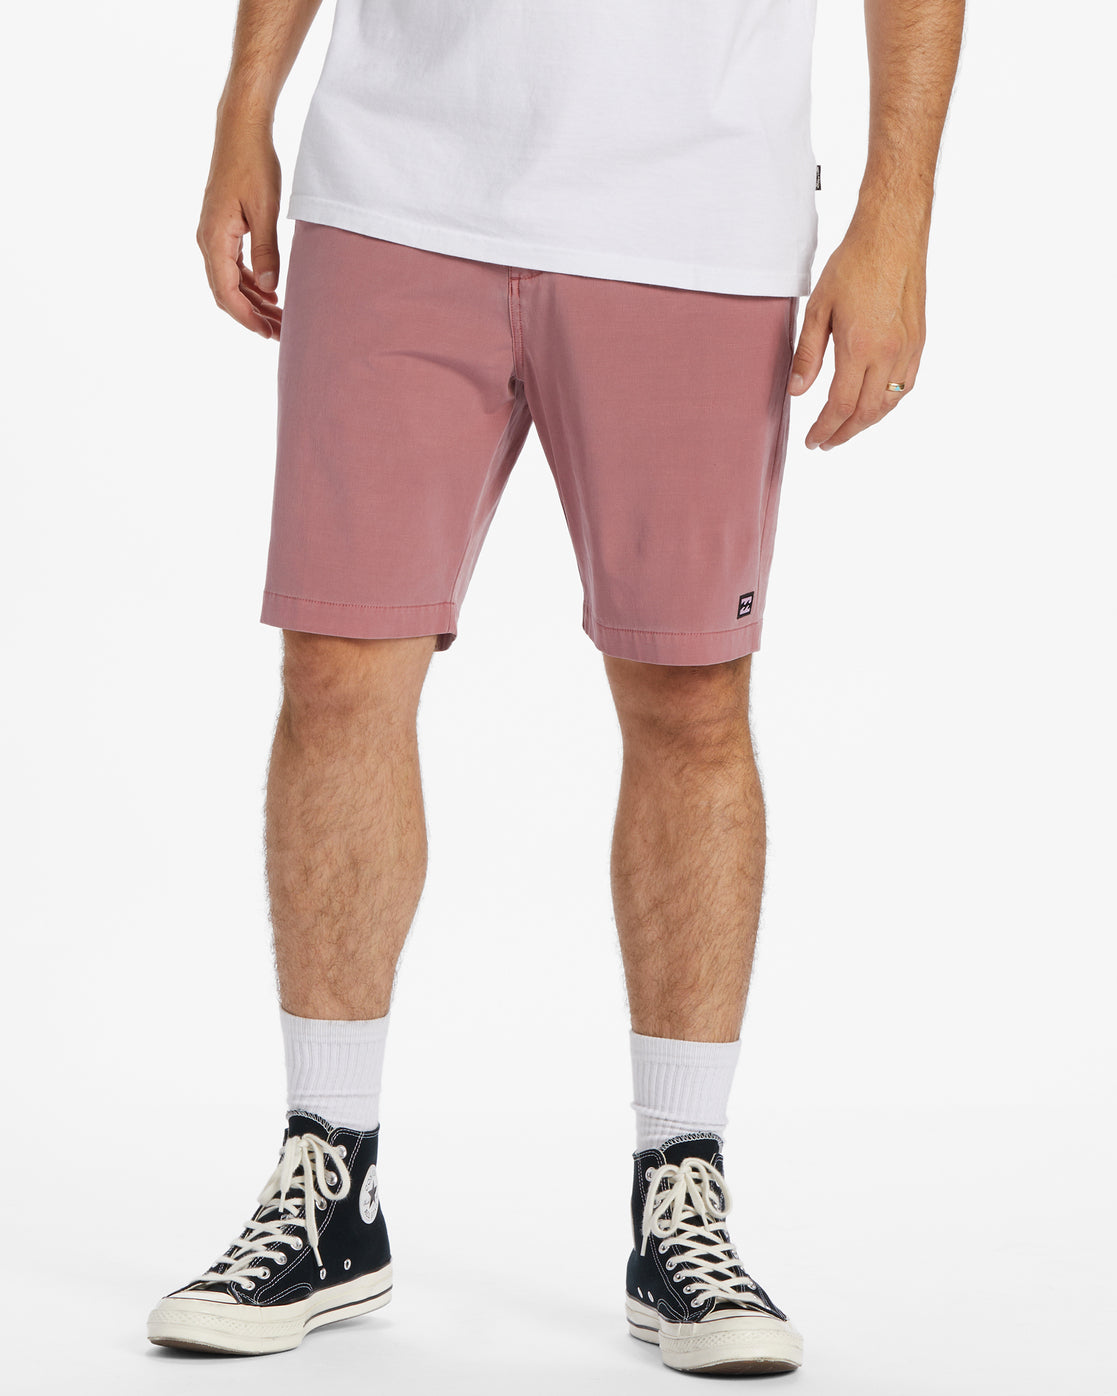 CROSSFIRE WAVE WASHED SHORTS - ABYHY03000